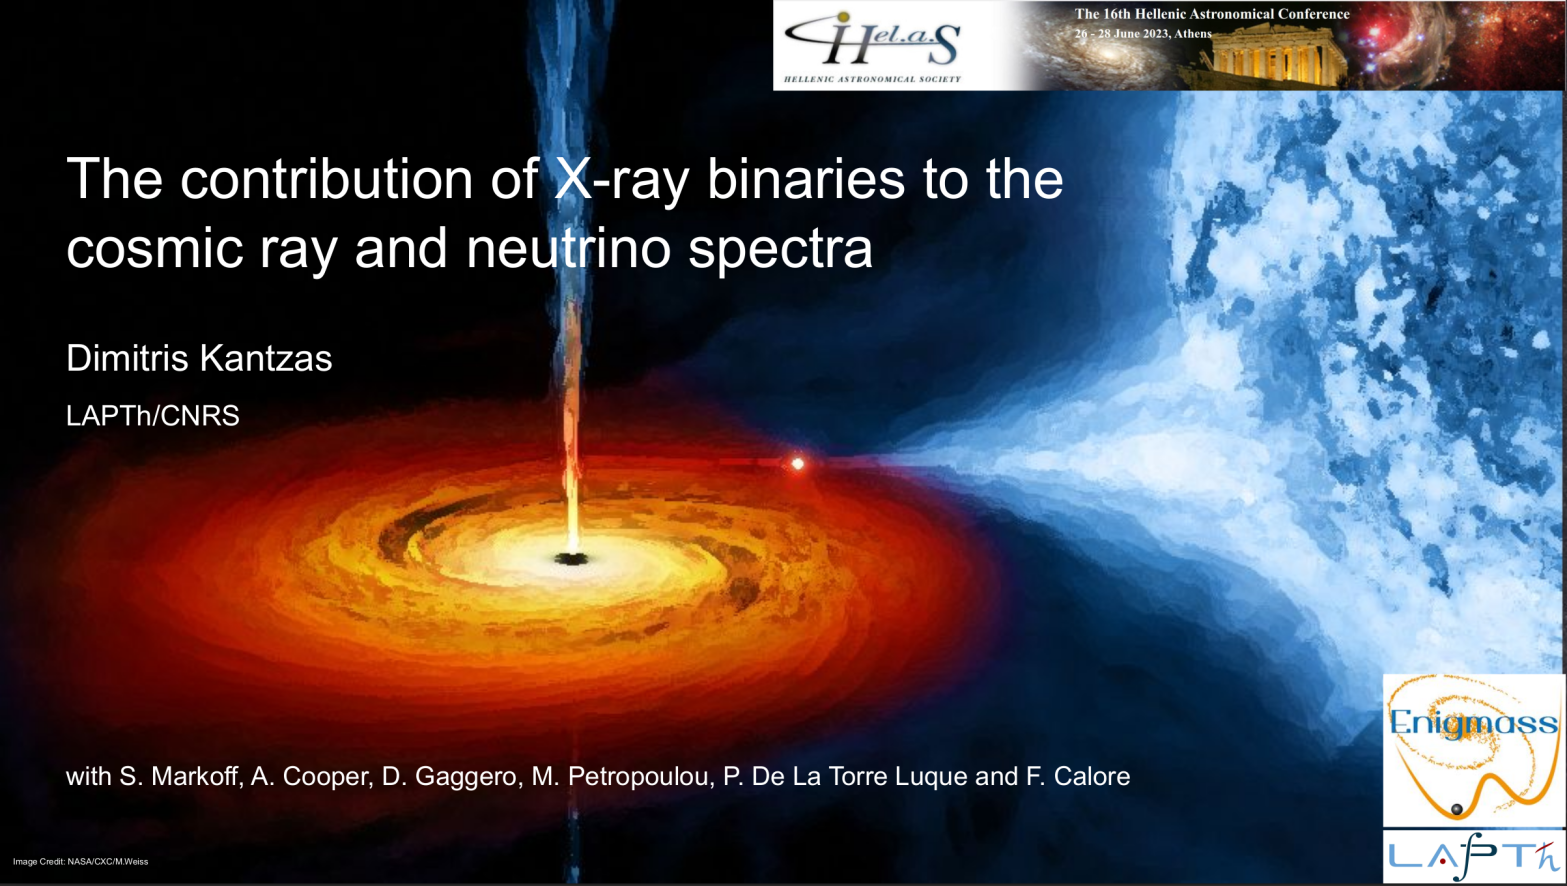 The contribution of X-ray binaries to the cosmic ray and neutrino spectra